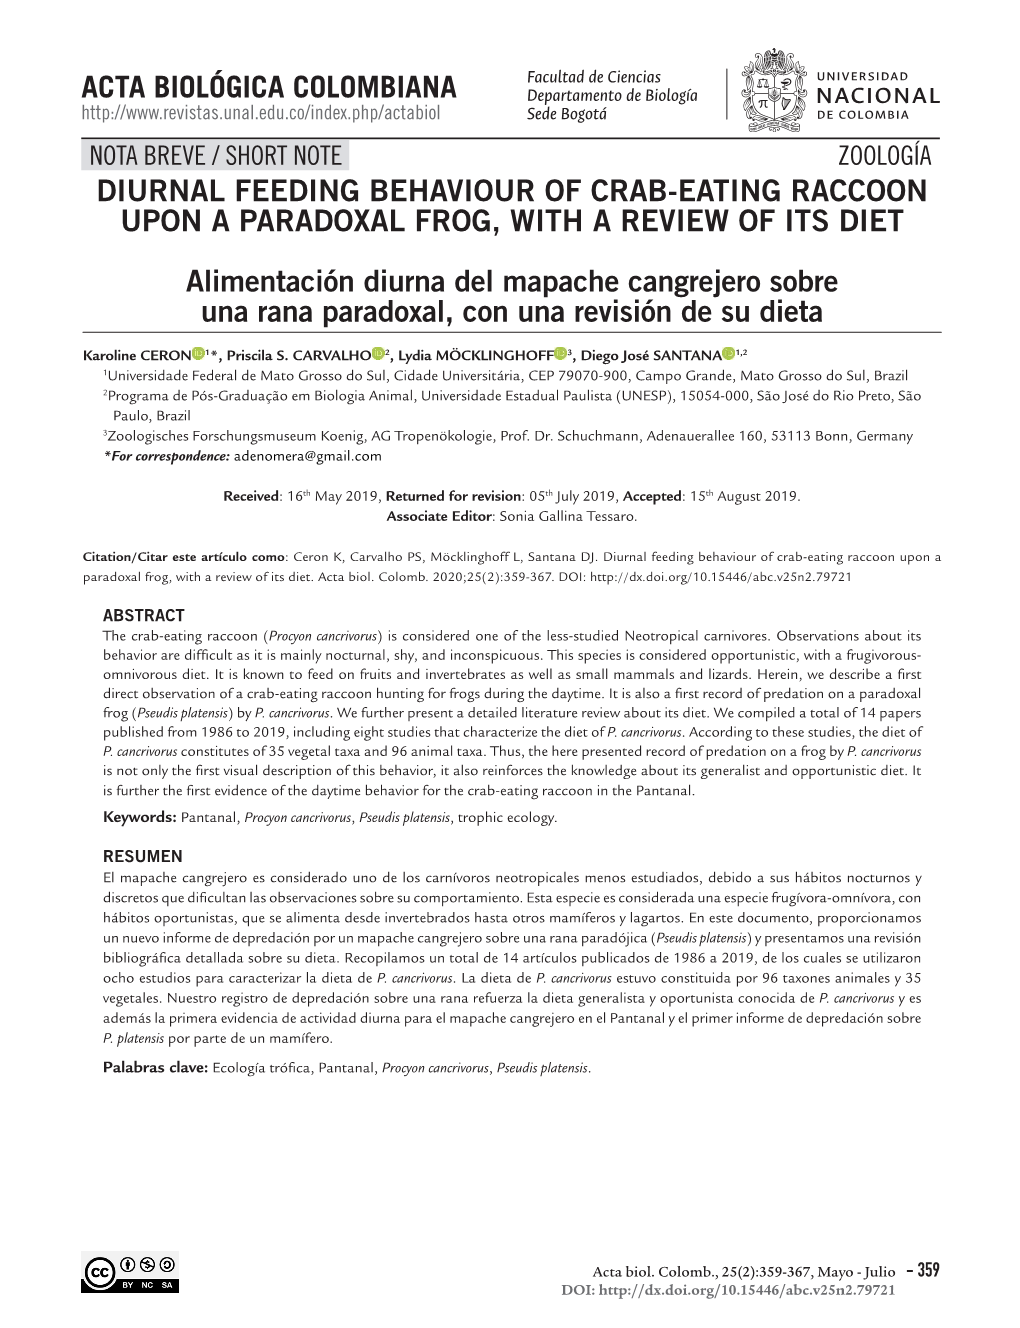 DIURNAL FEEDING BEHAVIOUR of CRAB-EATING RACCOON UPON a PARADOXAL FROG, with a REVIEW of ITS DIET Alimentación Diurna Del Mapac